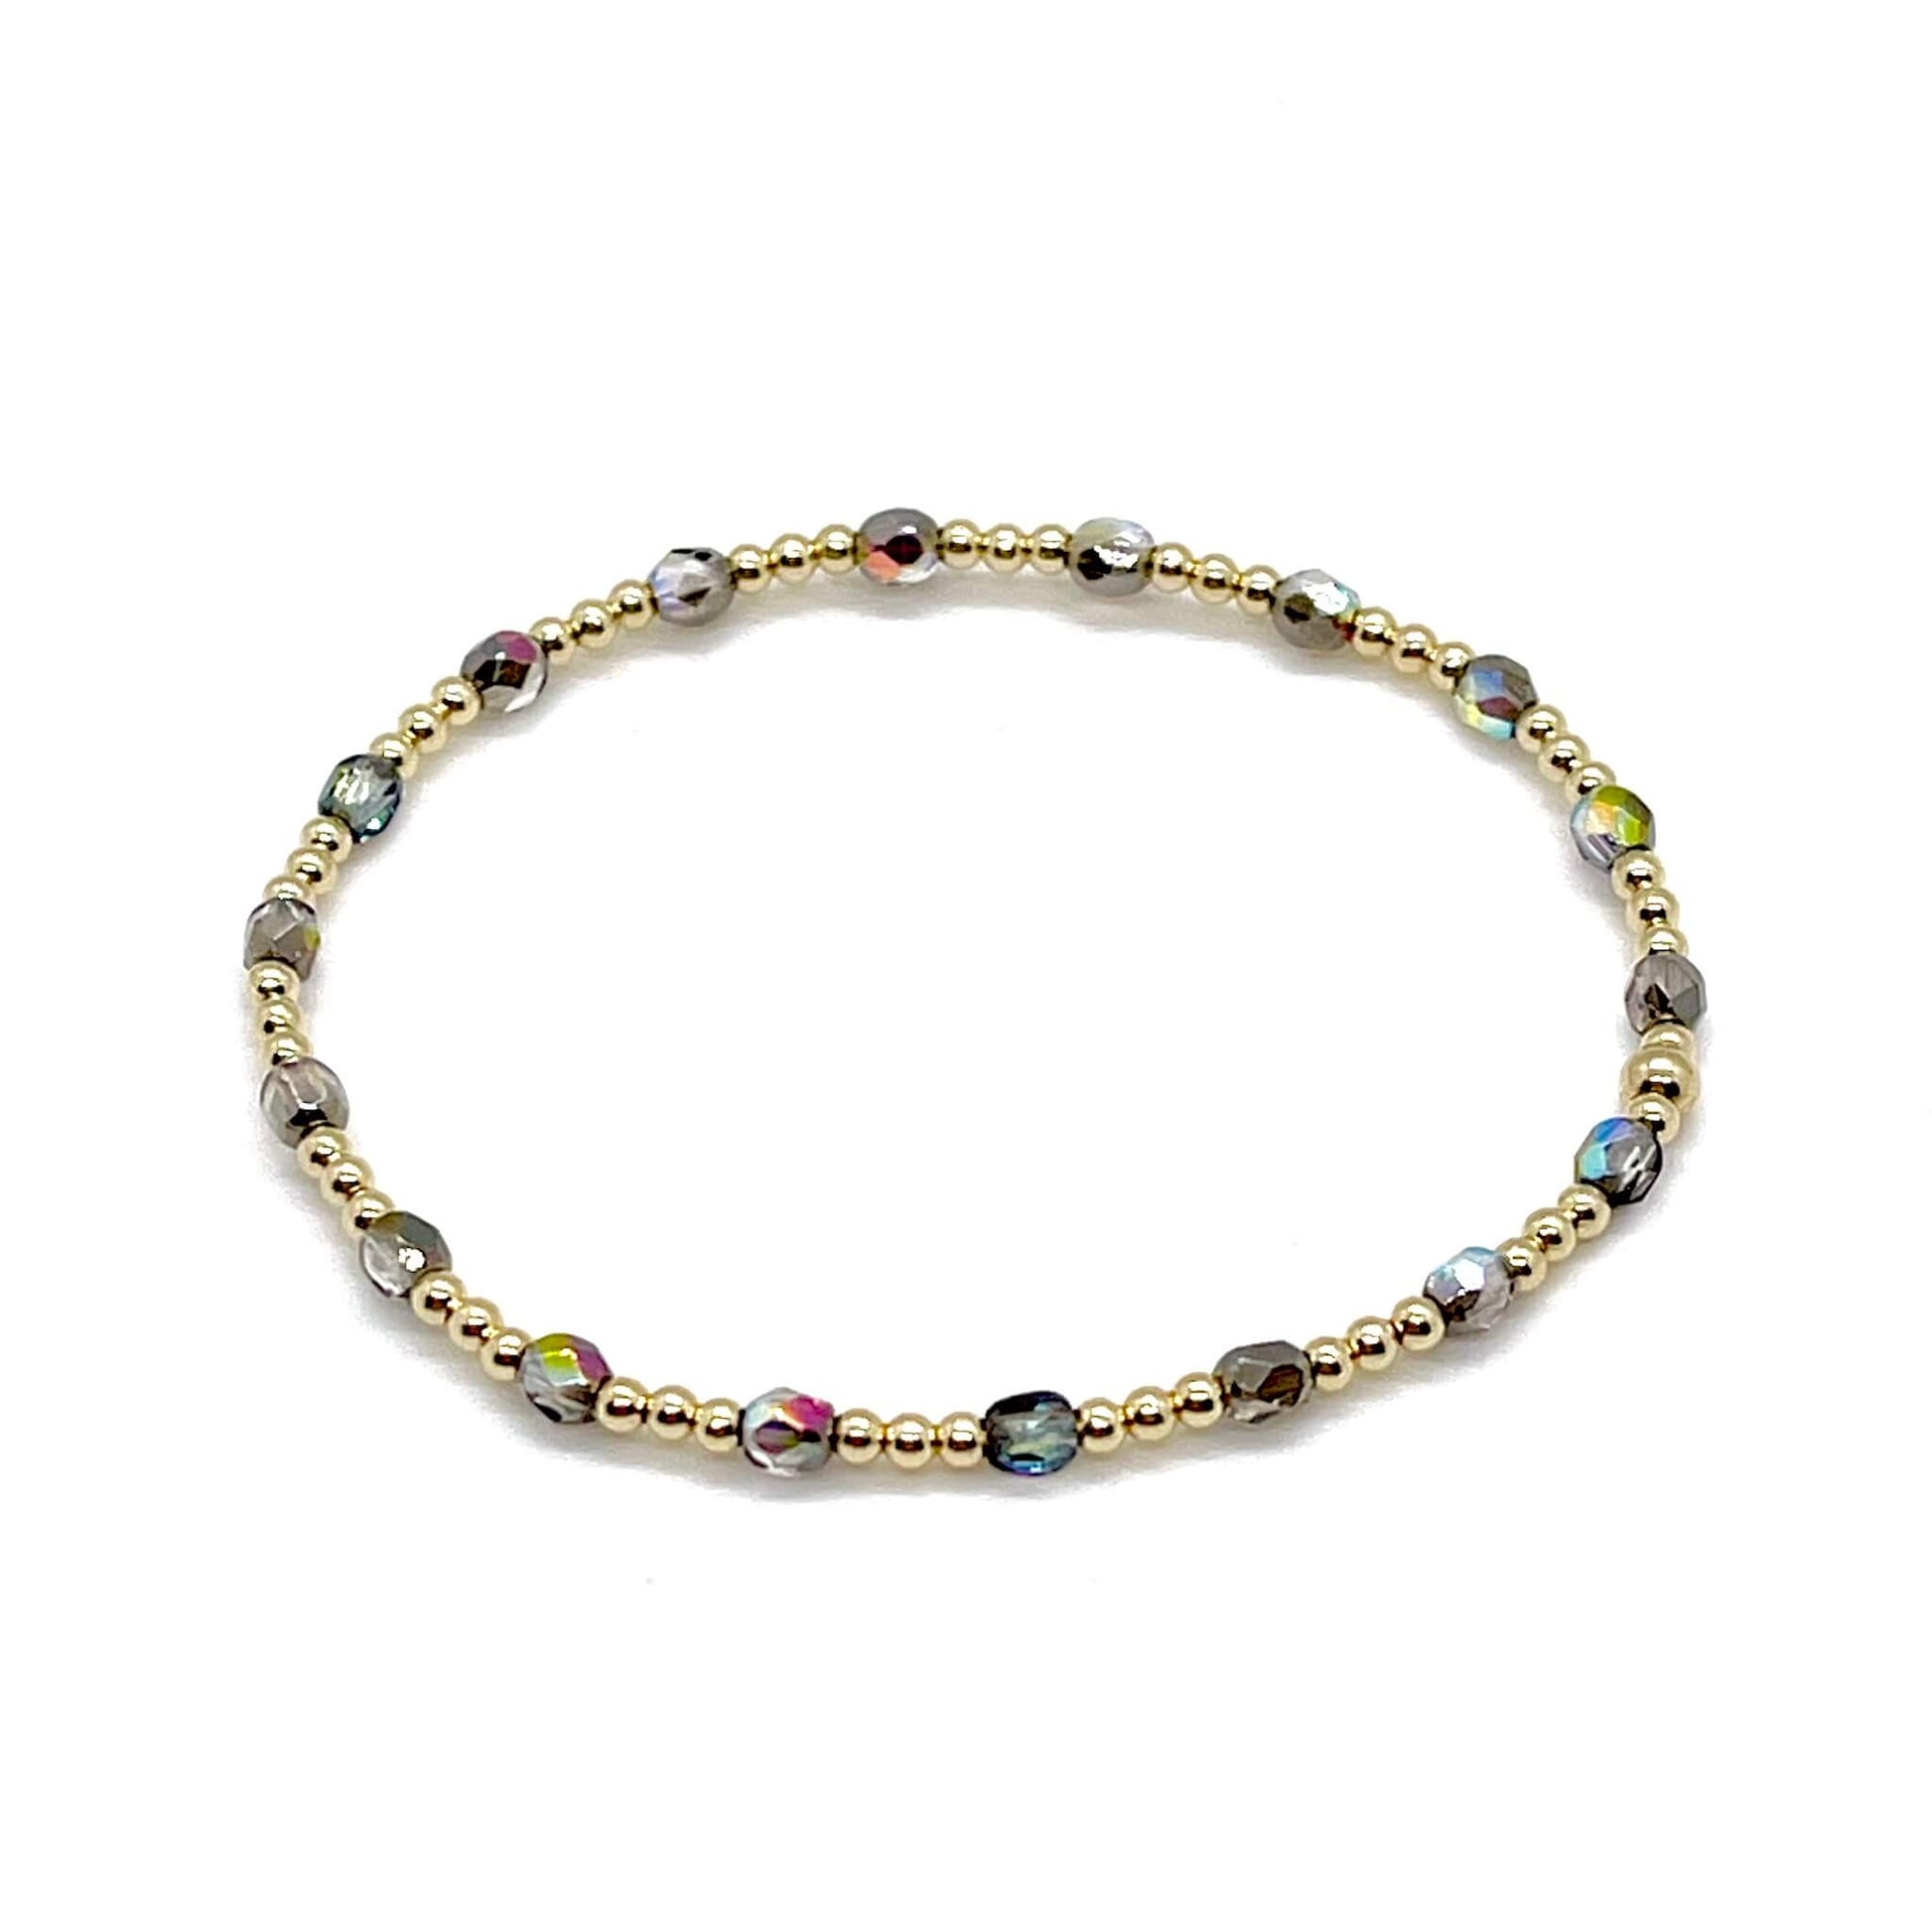 Grey-silver crystal bracelet with dainty 14K gold filled beads on a stretchy cord.